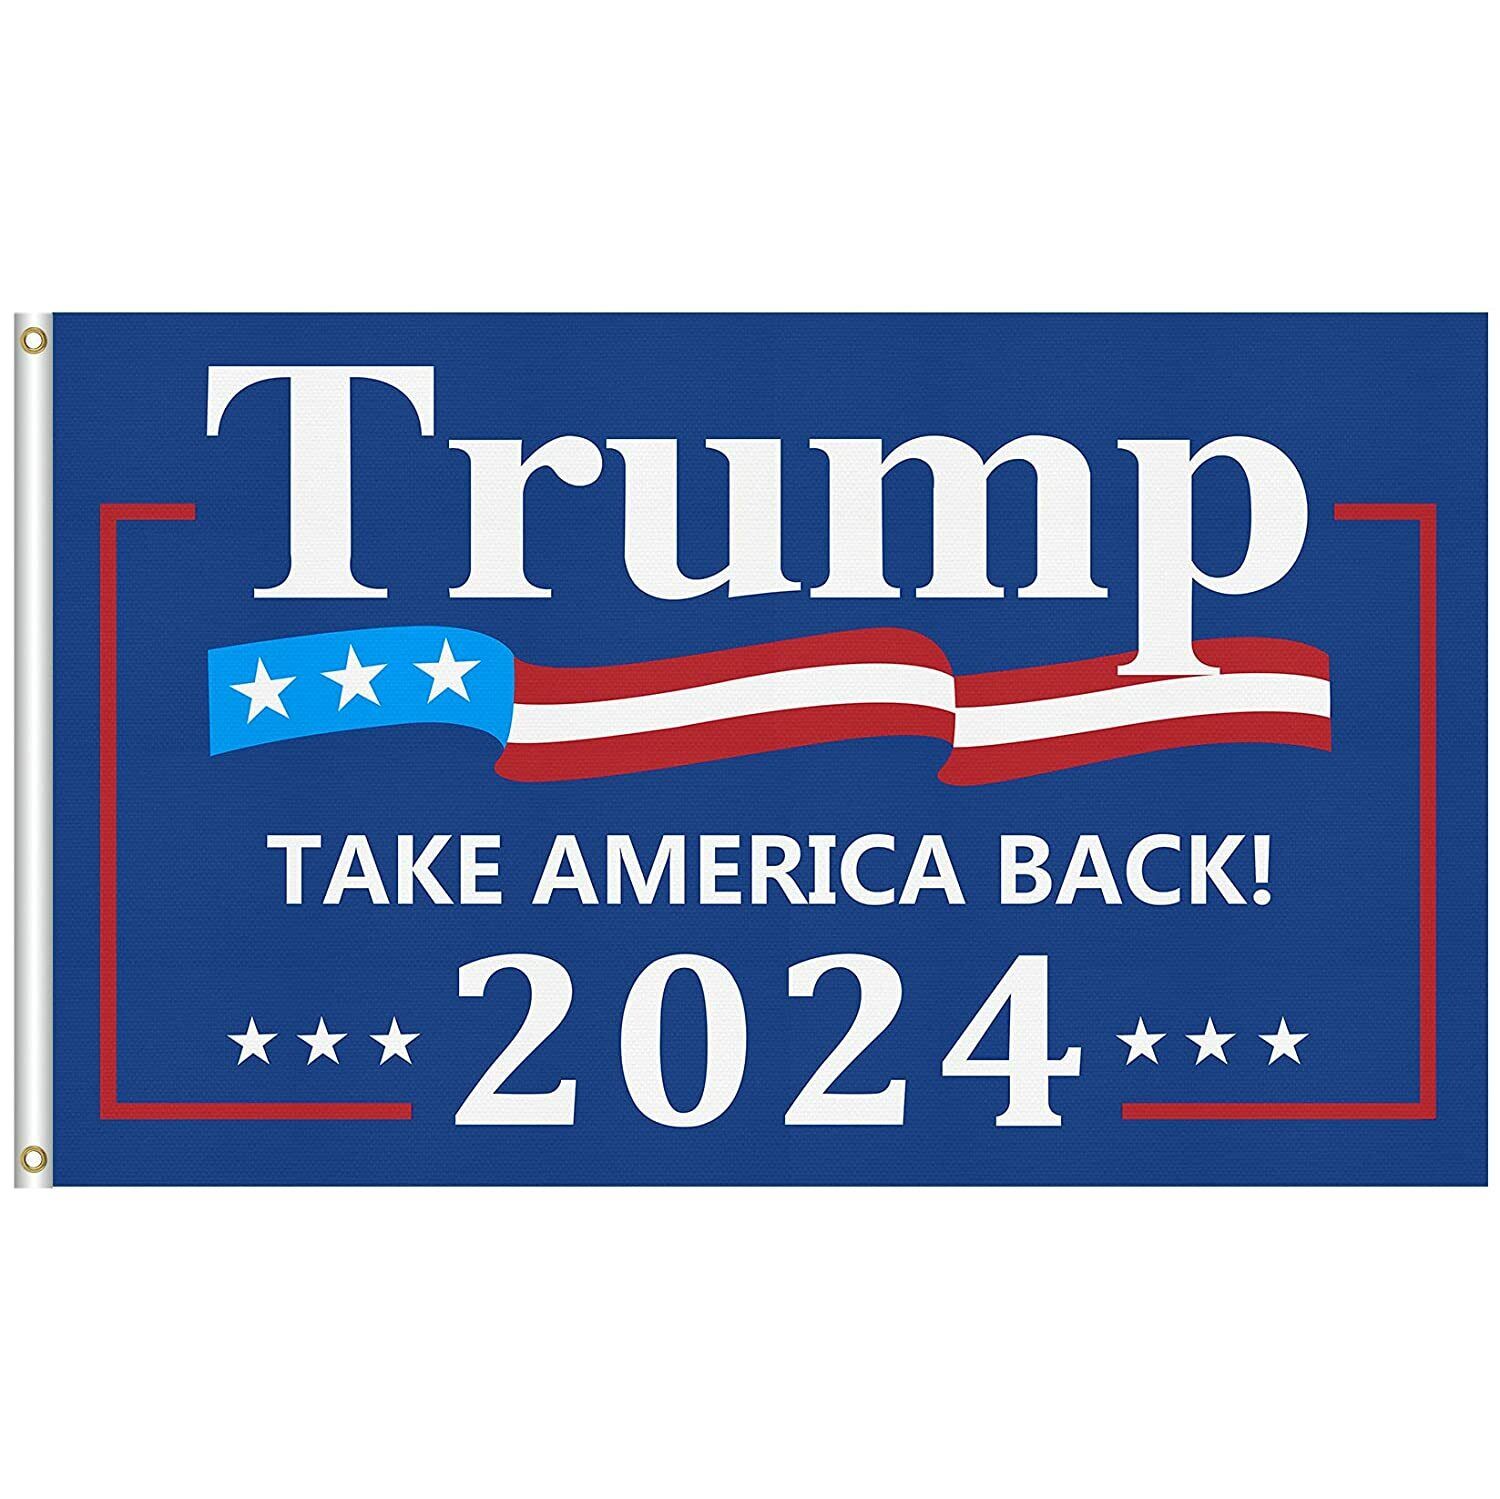 2024 Trump Flag 3x5 FT Re-Elect Donald Trump for US President TAKE AMERICA BACK